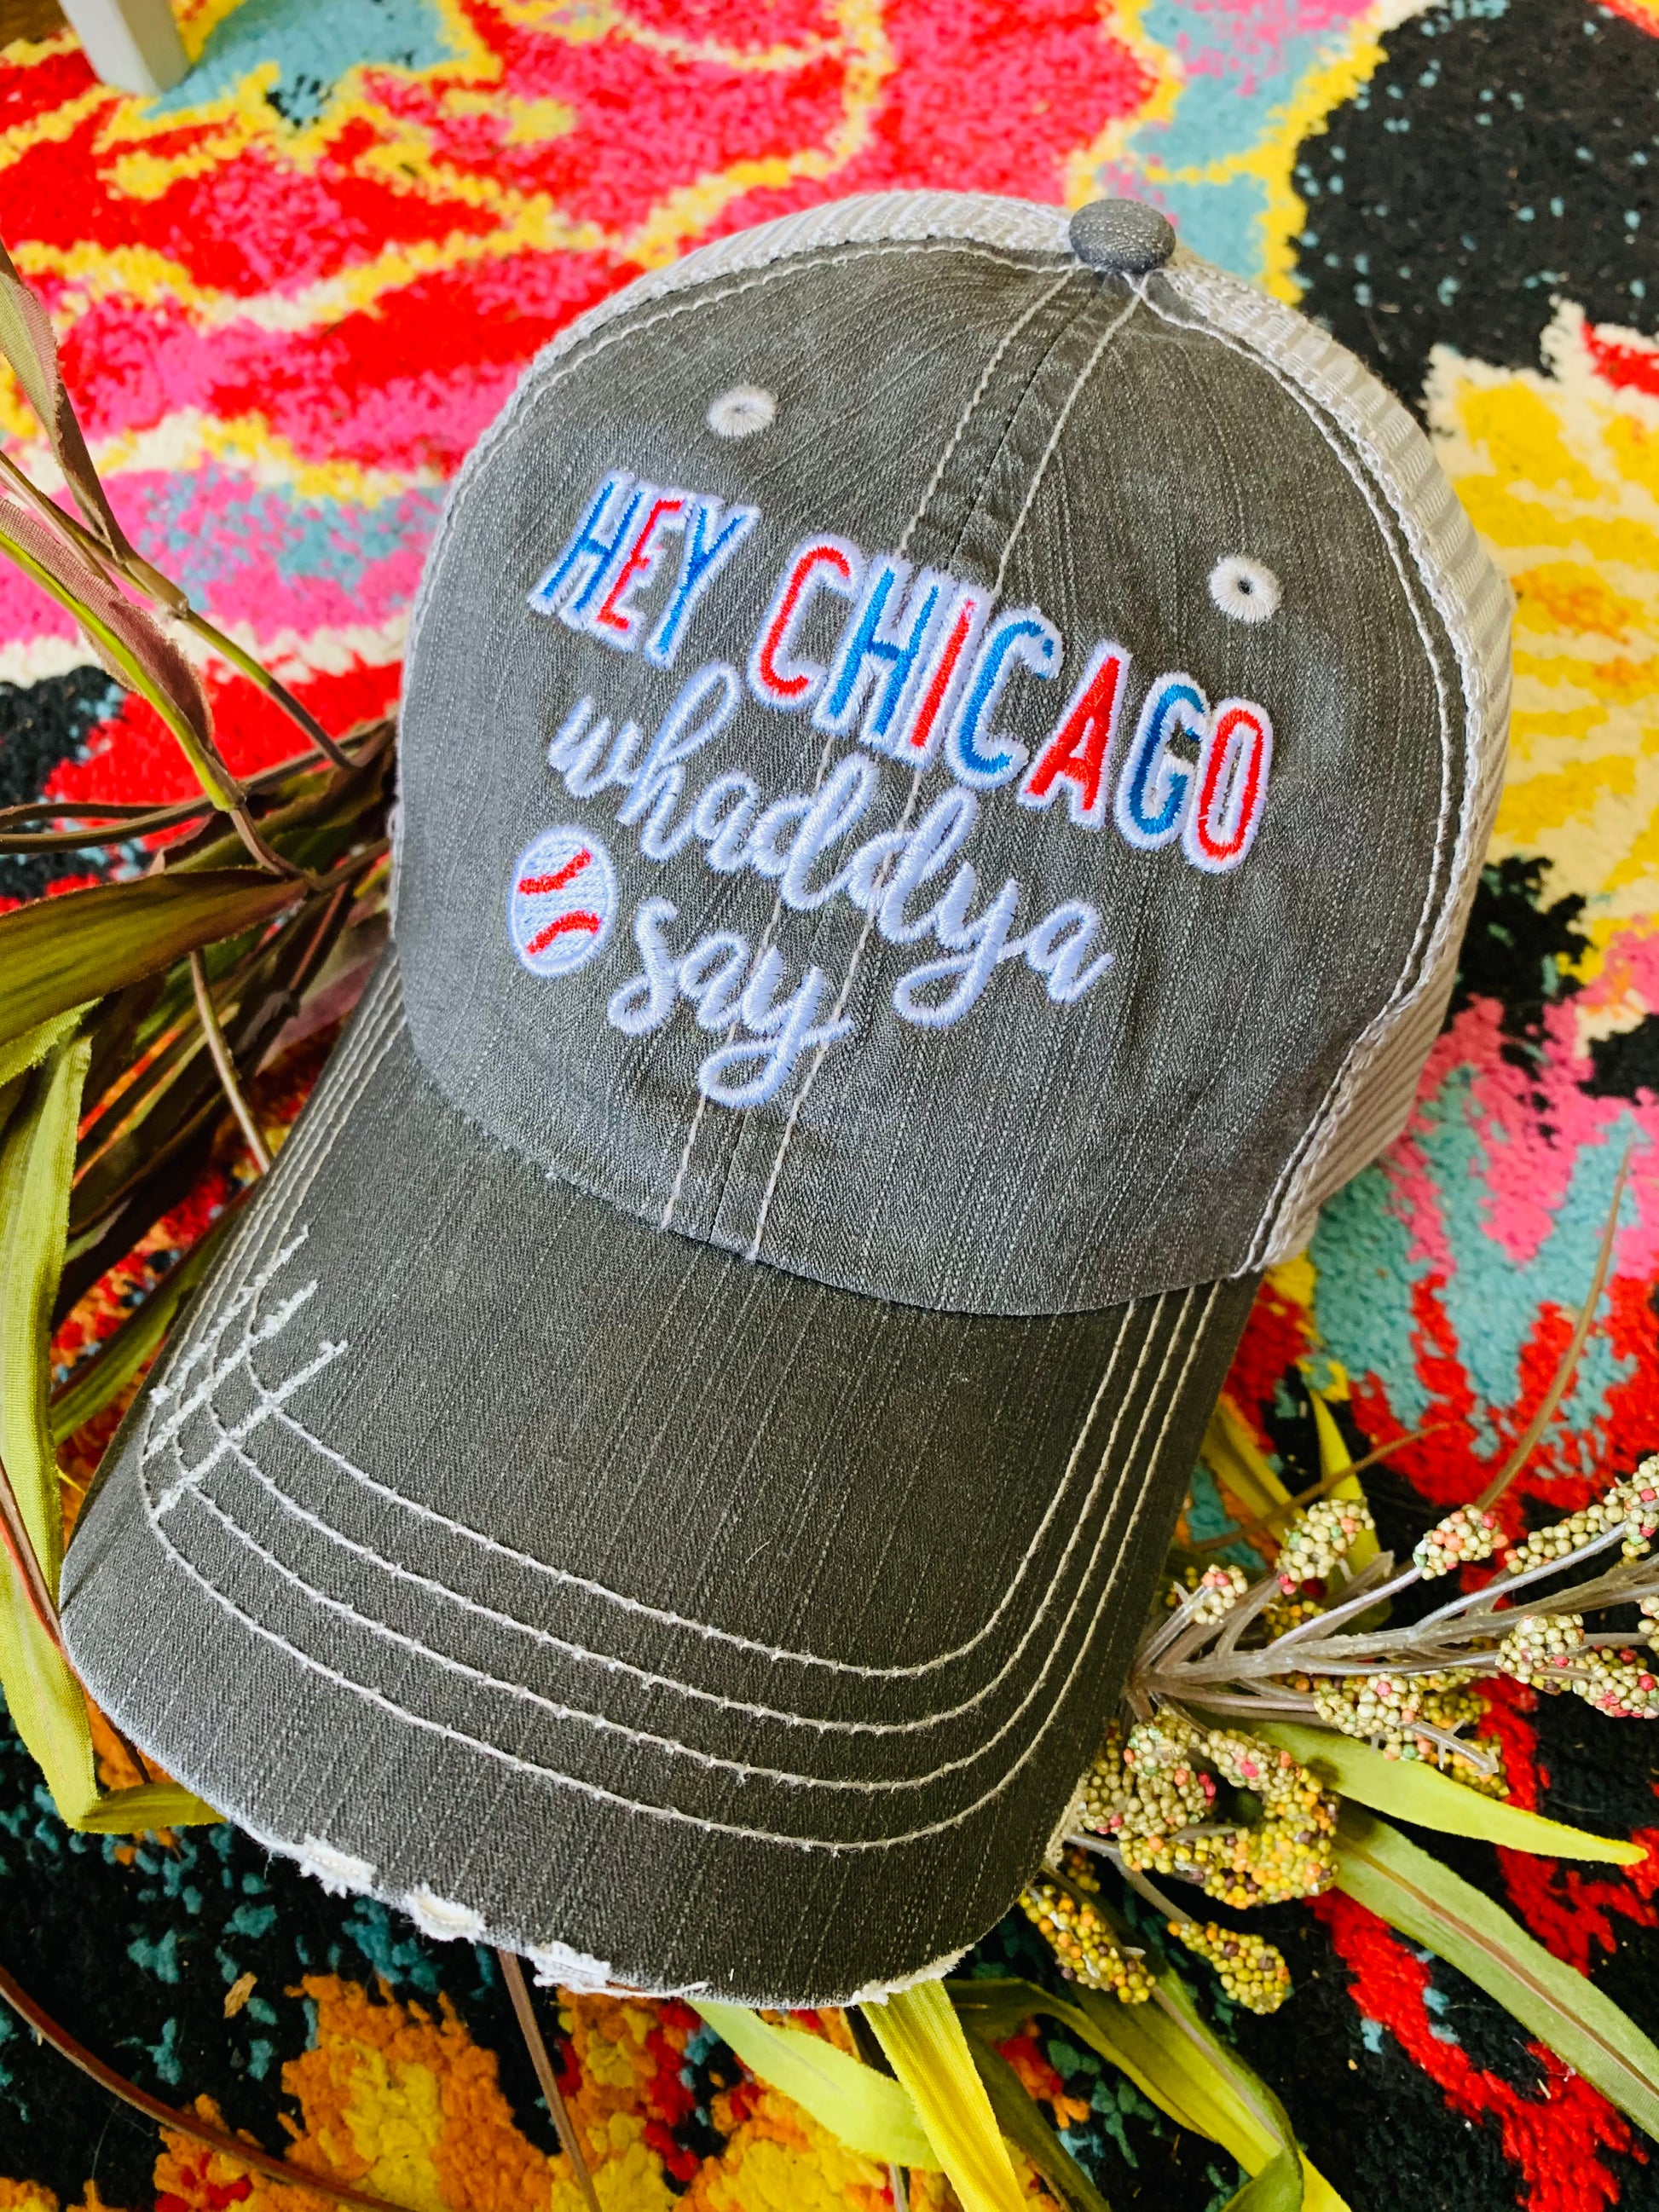 Baseball hats Chicago Cubs Hey Chicago whaddya say Embroidered distressed  gray trucker cap Unisex